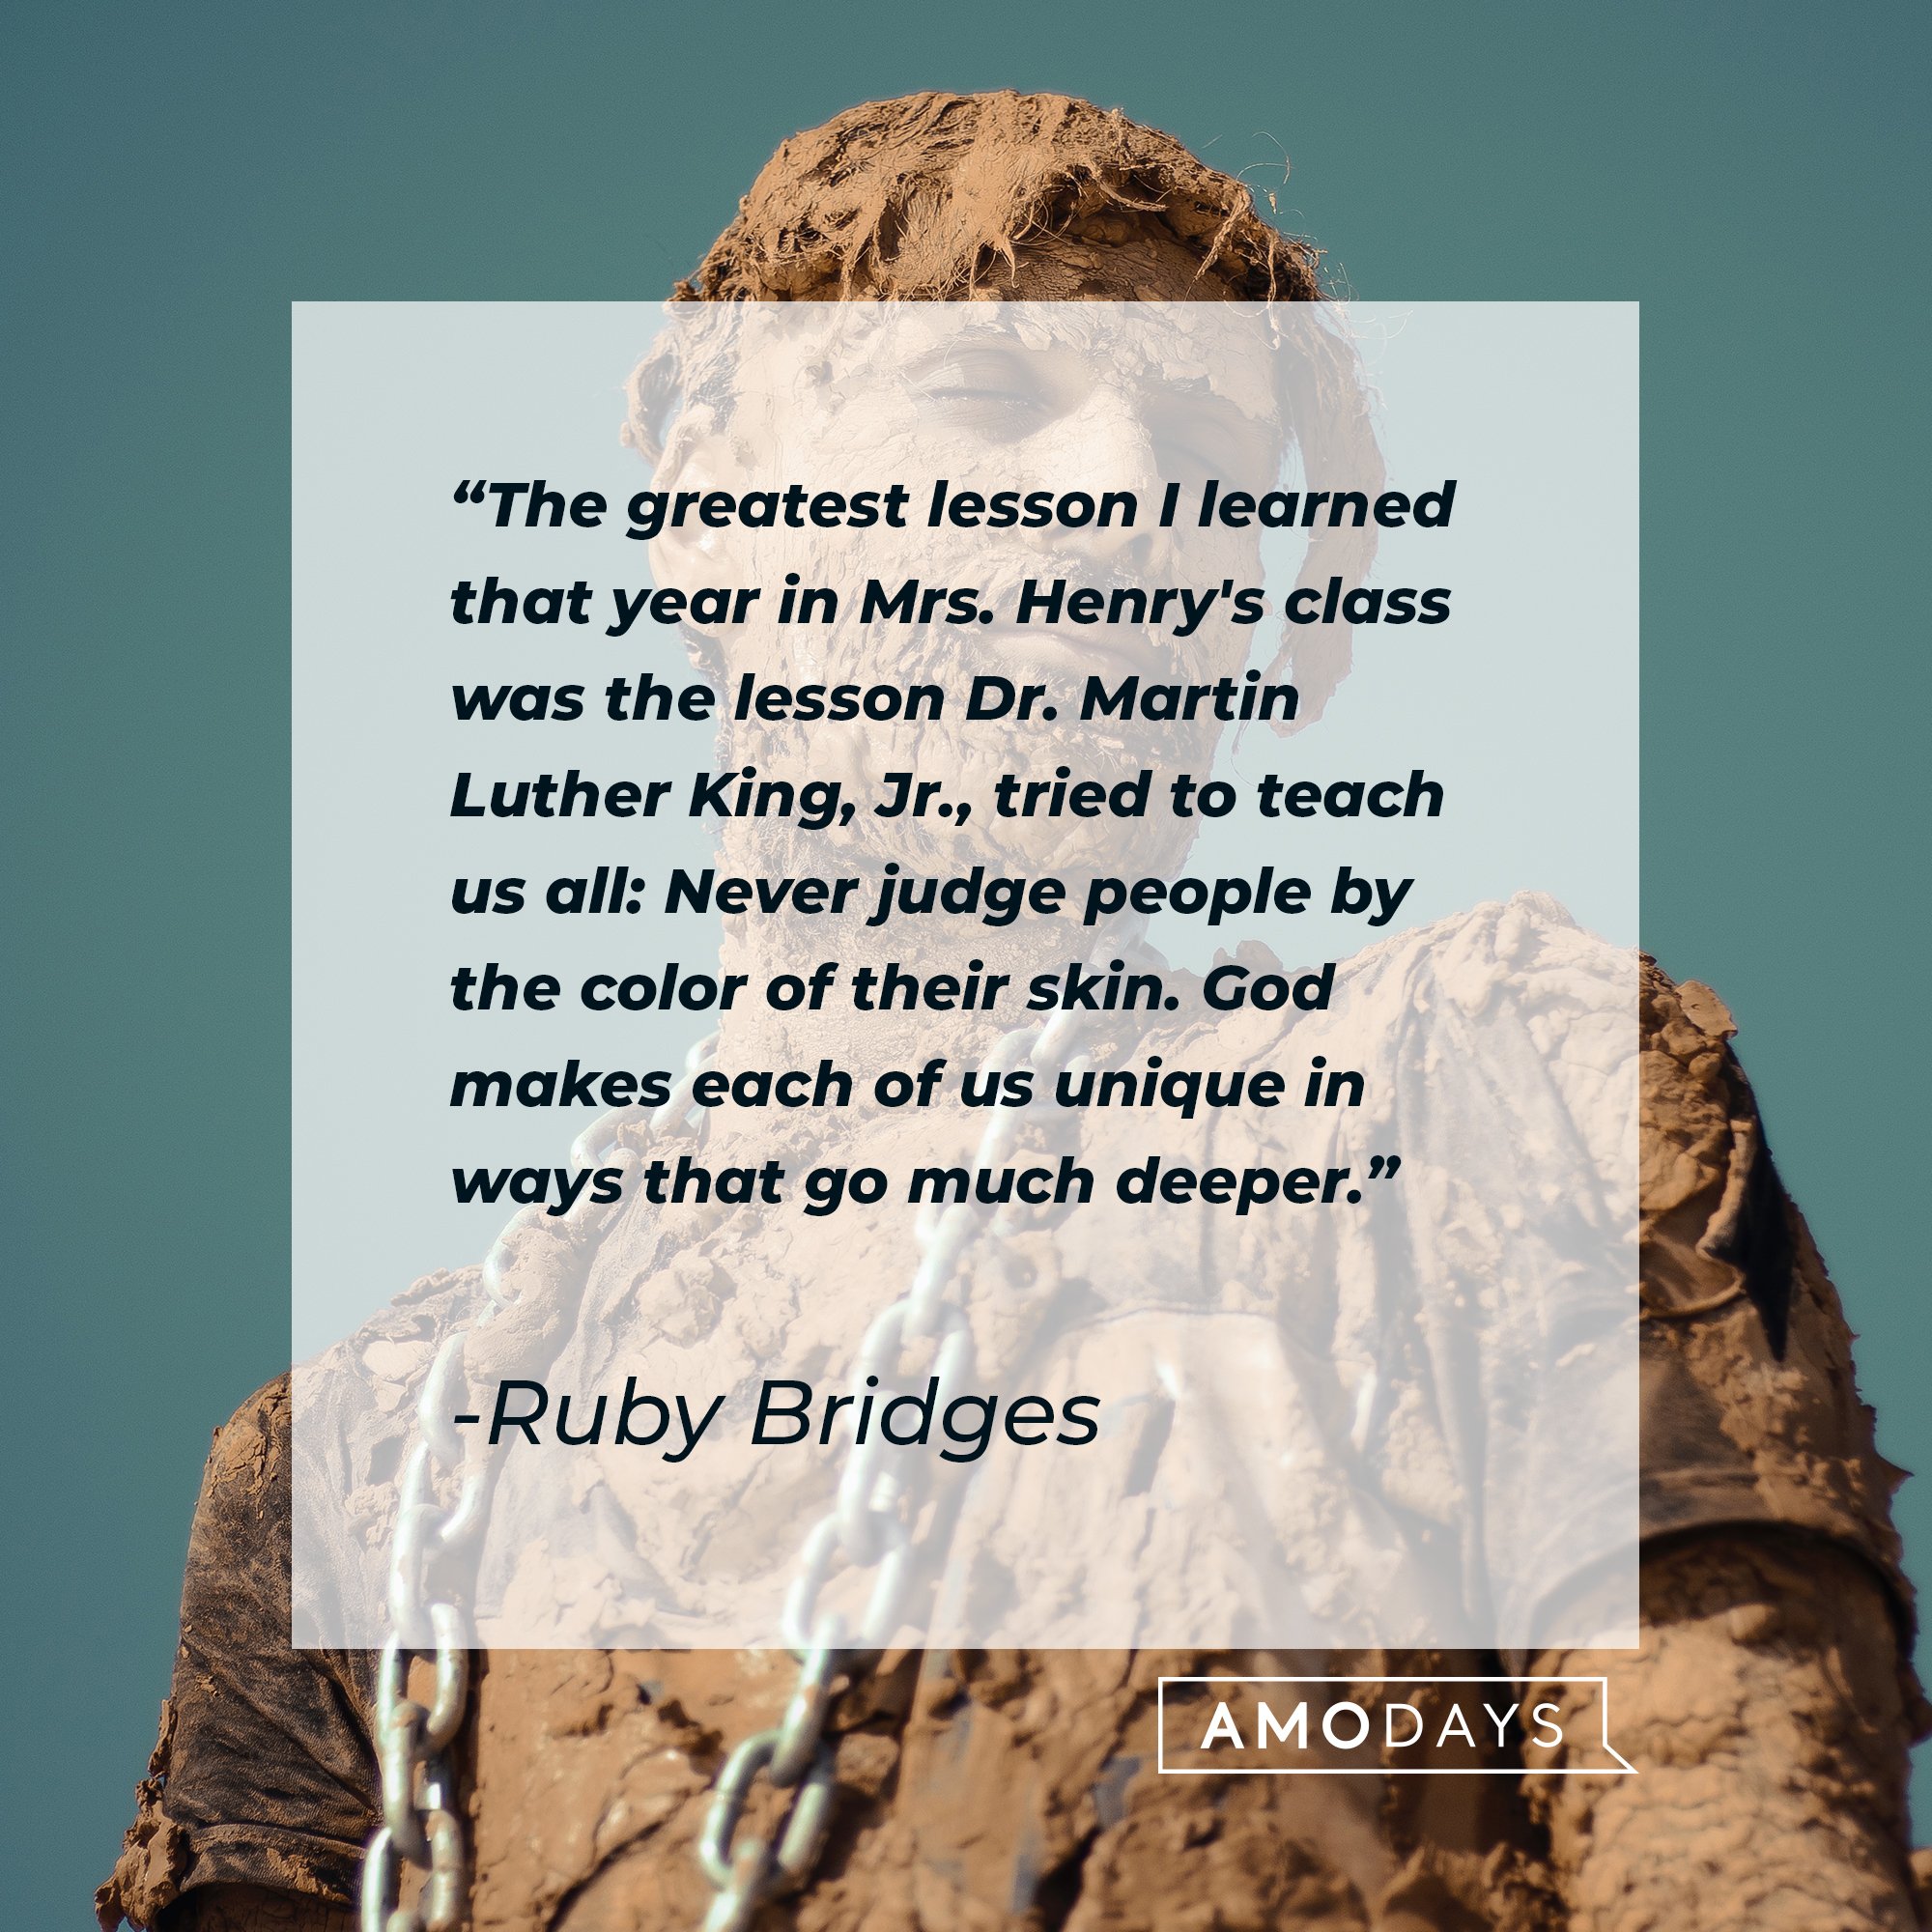 Ruby Bridges’ quote: “The greatest lesson I learned that year in Mrs. Henry's class was the lesson Dr. Martin Luther King, Jr., tried to teach us all: Never judge people by the color of their skin. God makes each of us unique in ways that go much deeper." | Image: AmoDays 